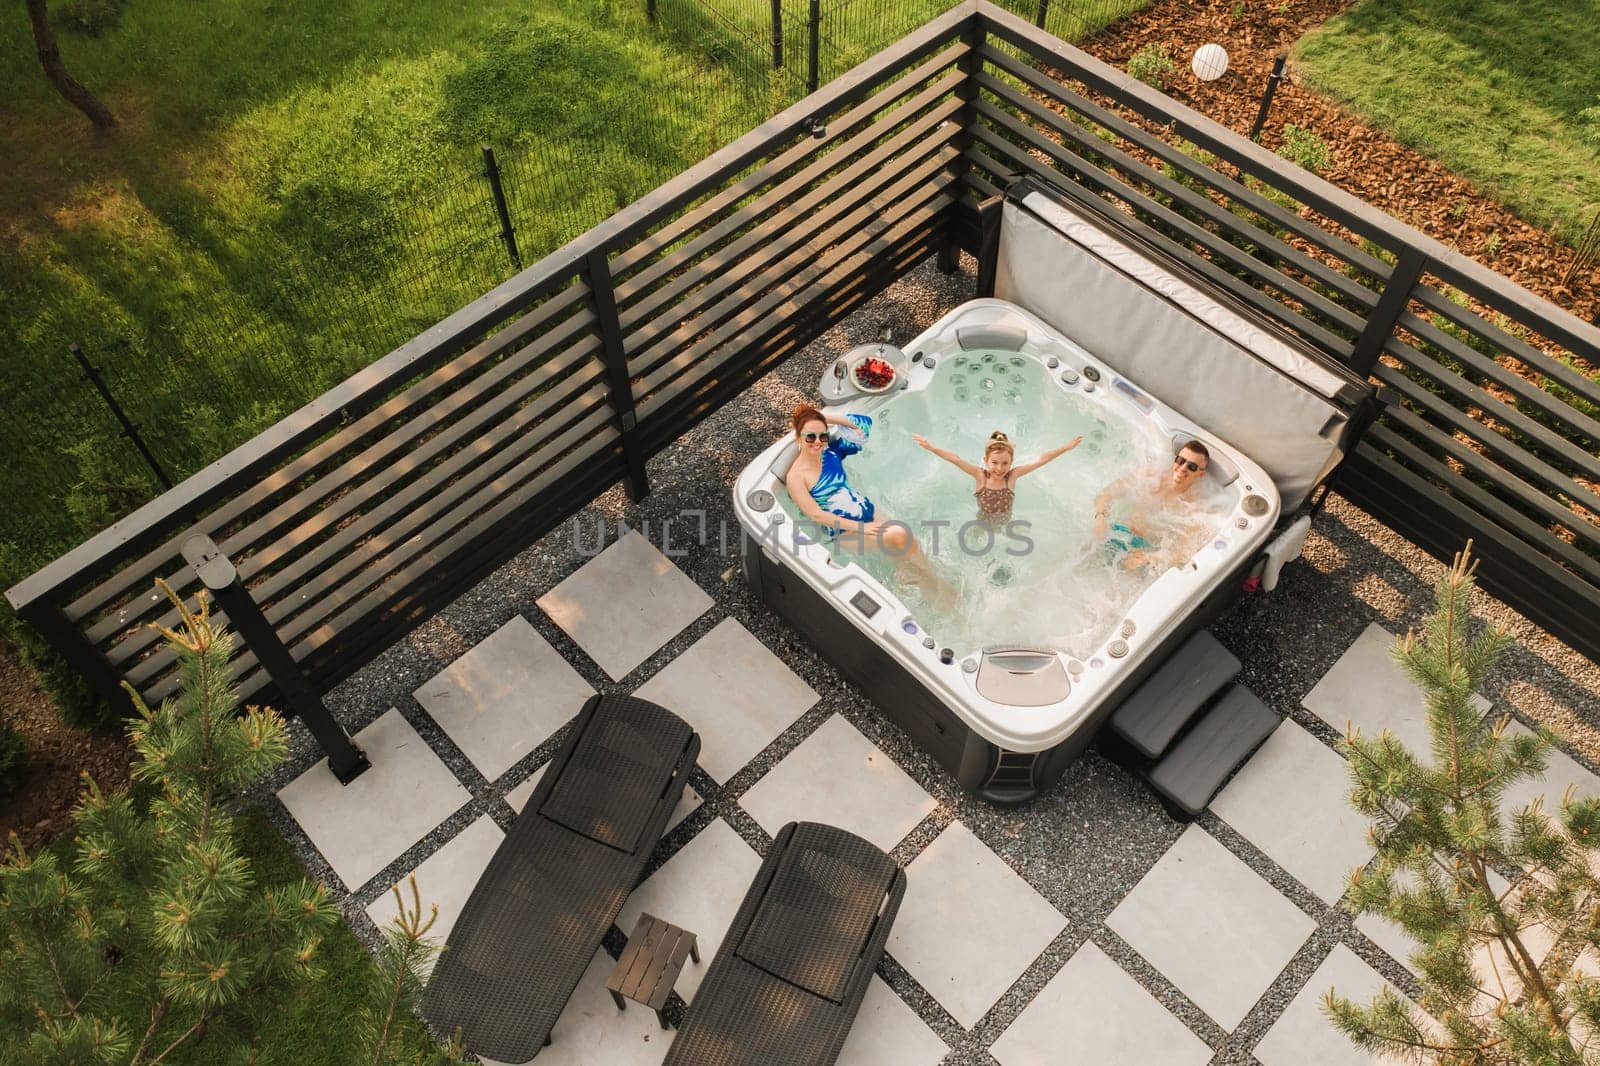 Top view of a family relaxing in an outdoor hot tub in summer by Lobachad